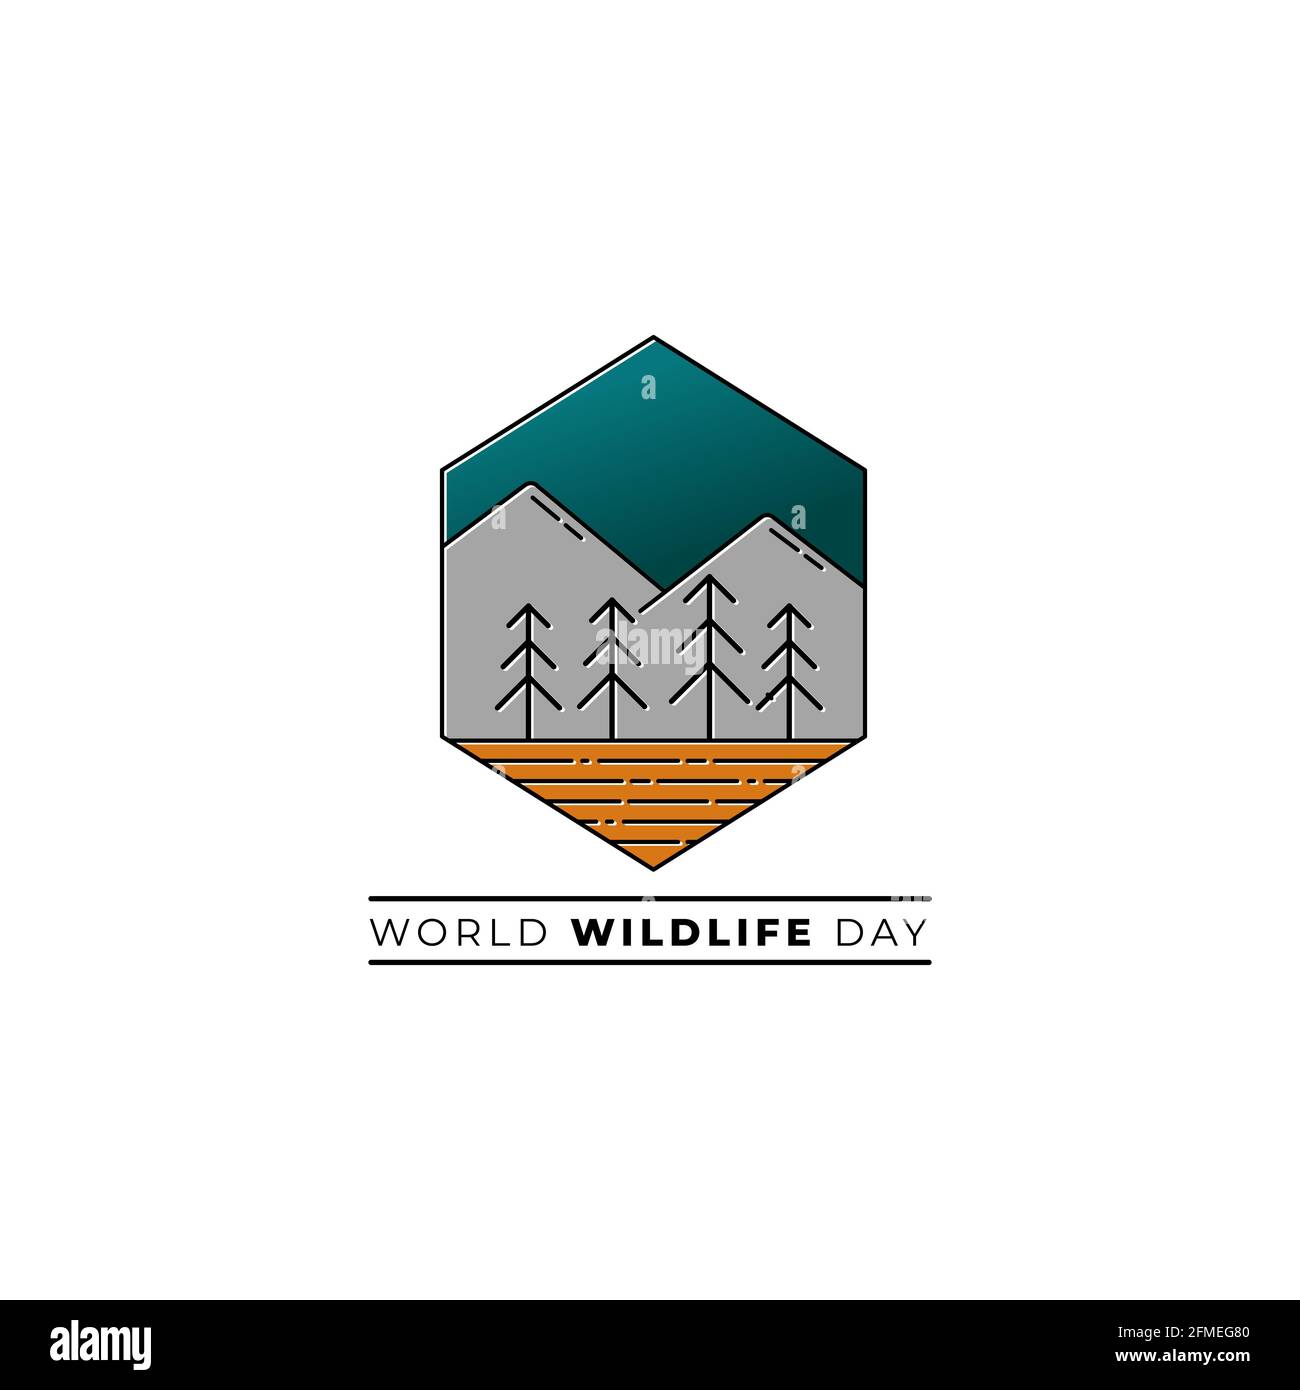 Line art symbol of forest design. good template for wildlife day or environmental design Stock Vector